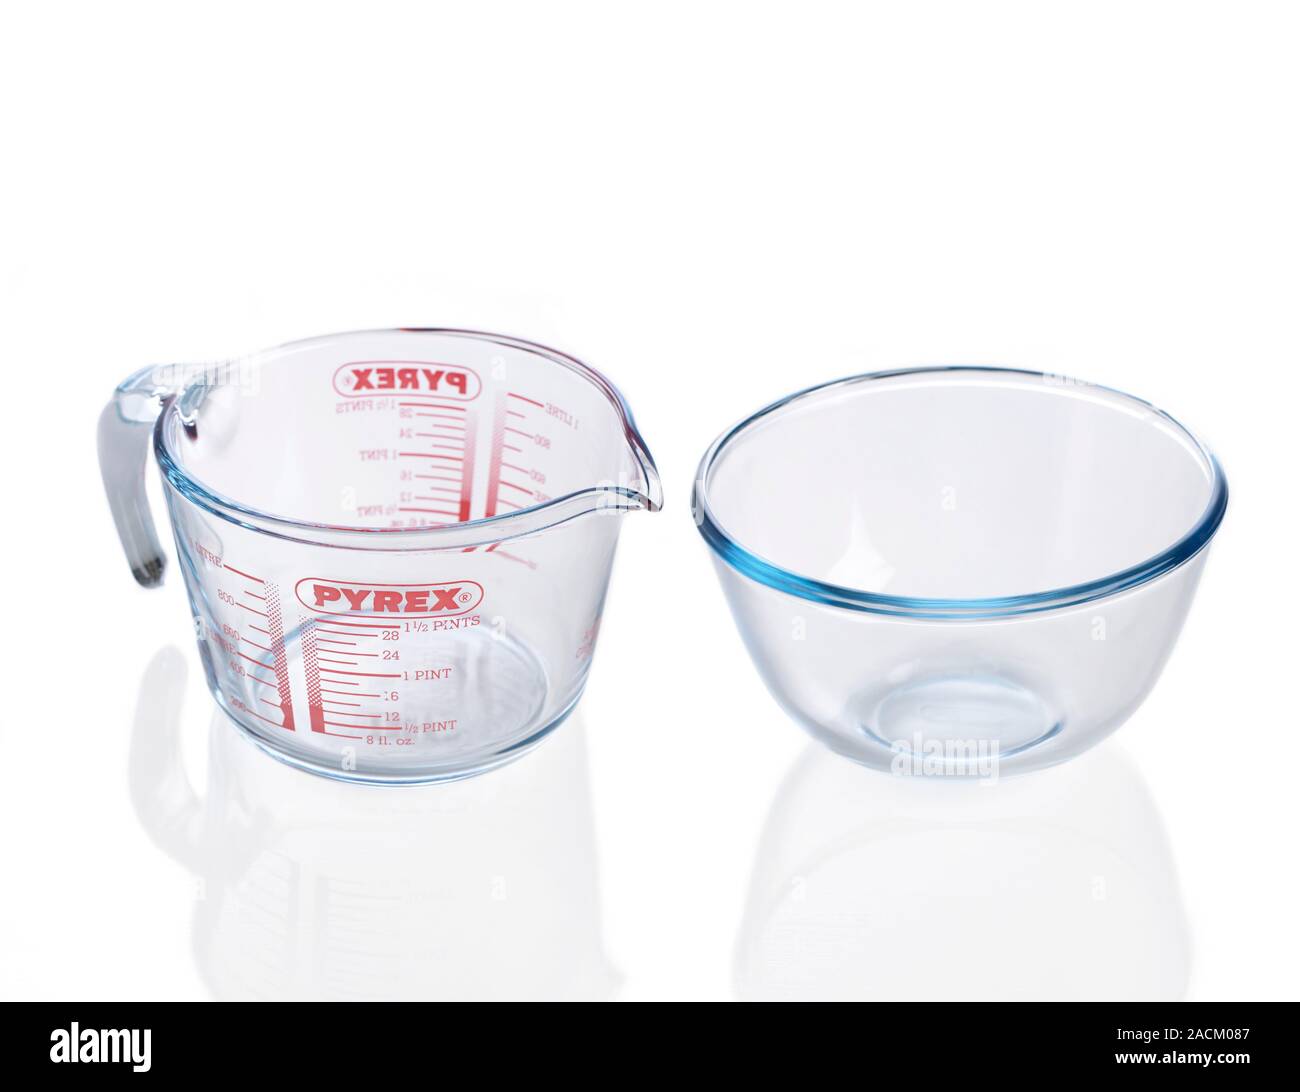 https://c8.alamy.com/comp/2ACM087/pyrex-jug-and-bowl-these-items-are-made-from-borosilicate-glass-a-type-of-glass-with-boron-added-to-it-it-is-more-resistant-to-thermal-shock-crack-2ACM087.jpg